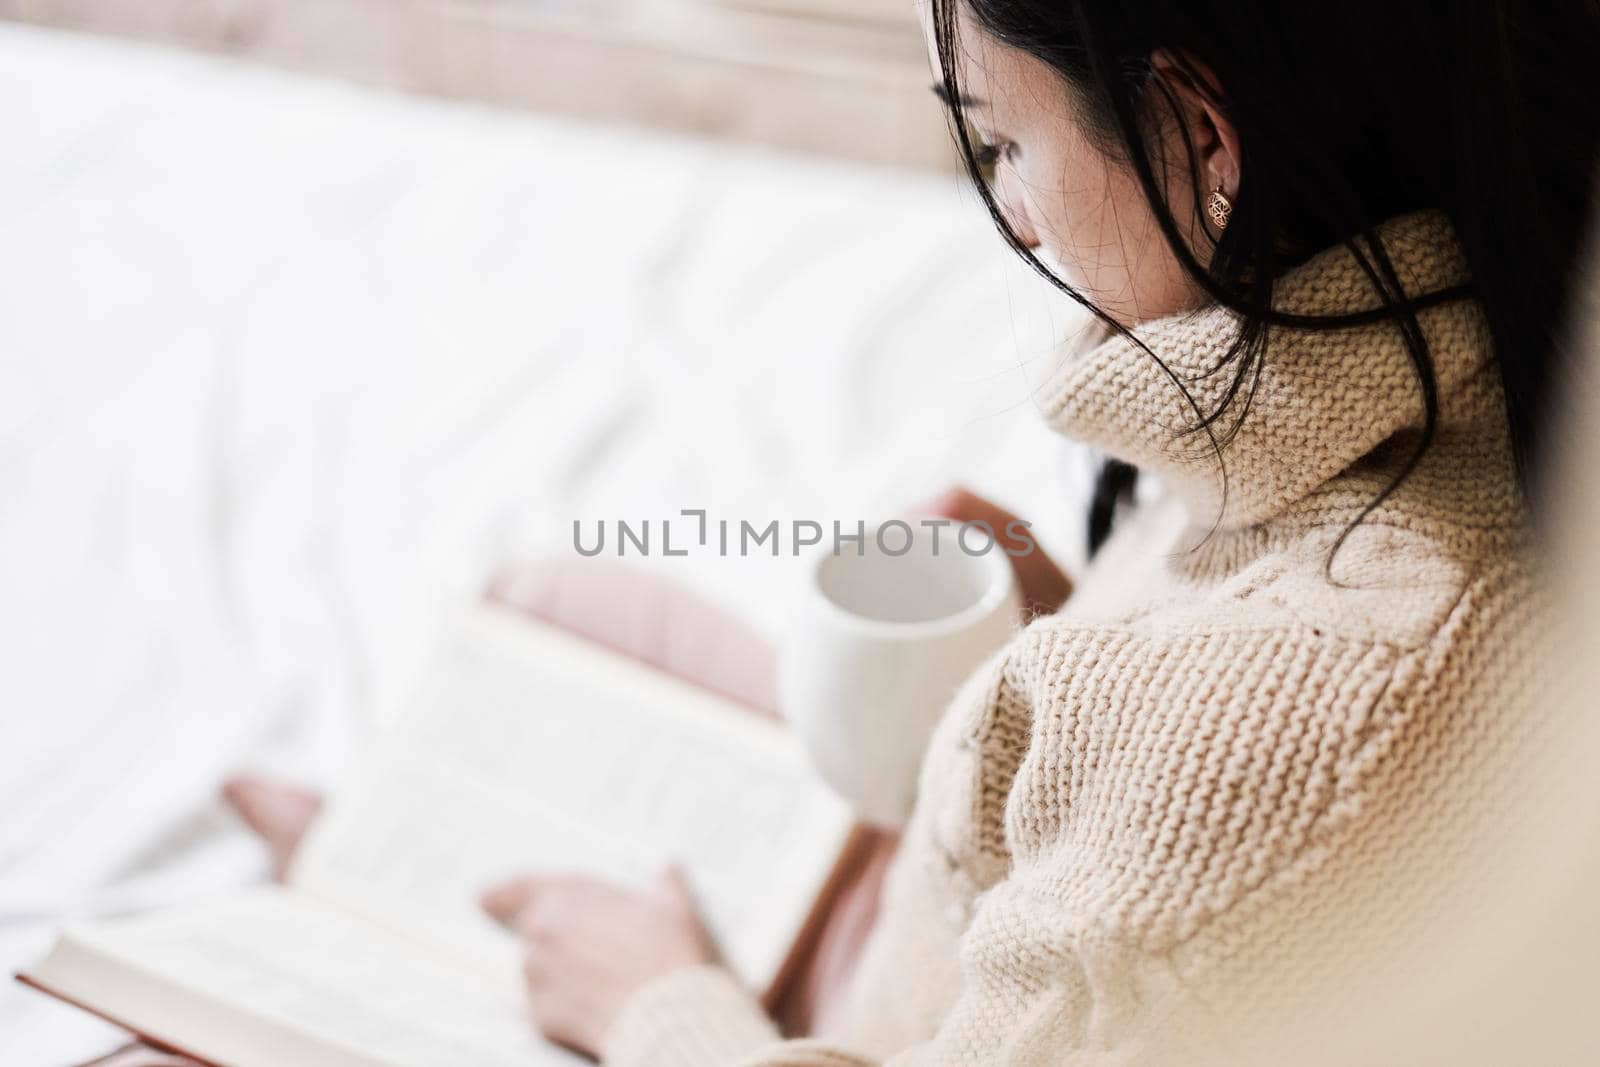 Reading in bed. Young woman drinking coffee and reading a book in the bed. Multi-racial female reads a book in the bed. Cozy autumn morning in the bedroom. Young female enjoys weekend